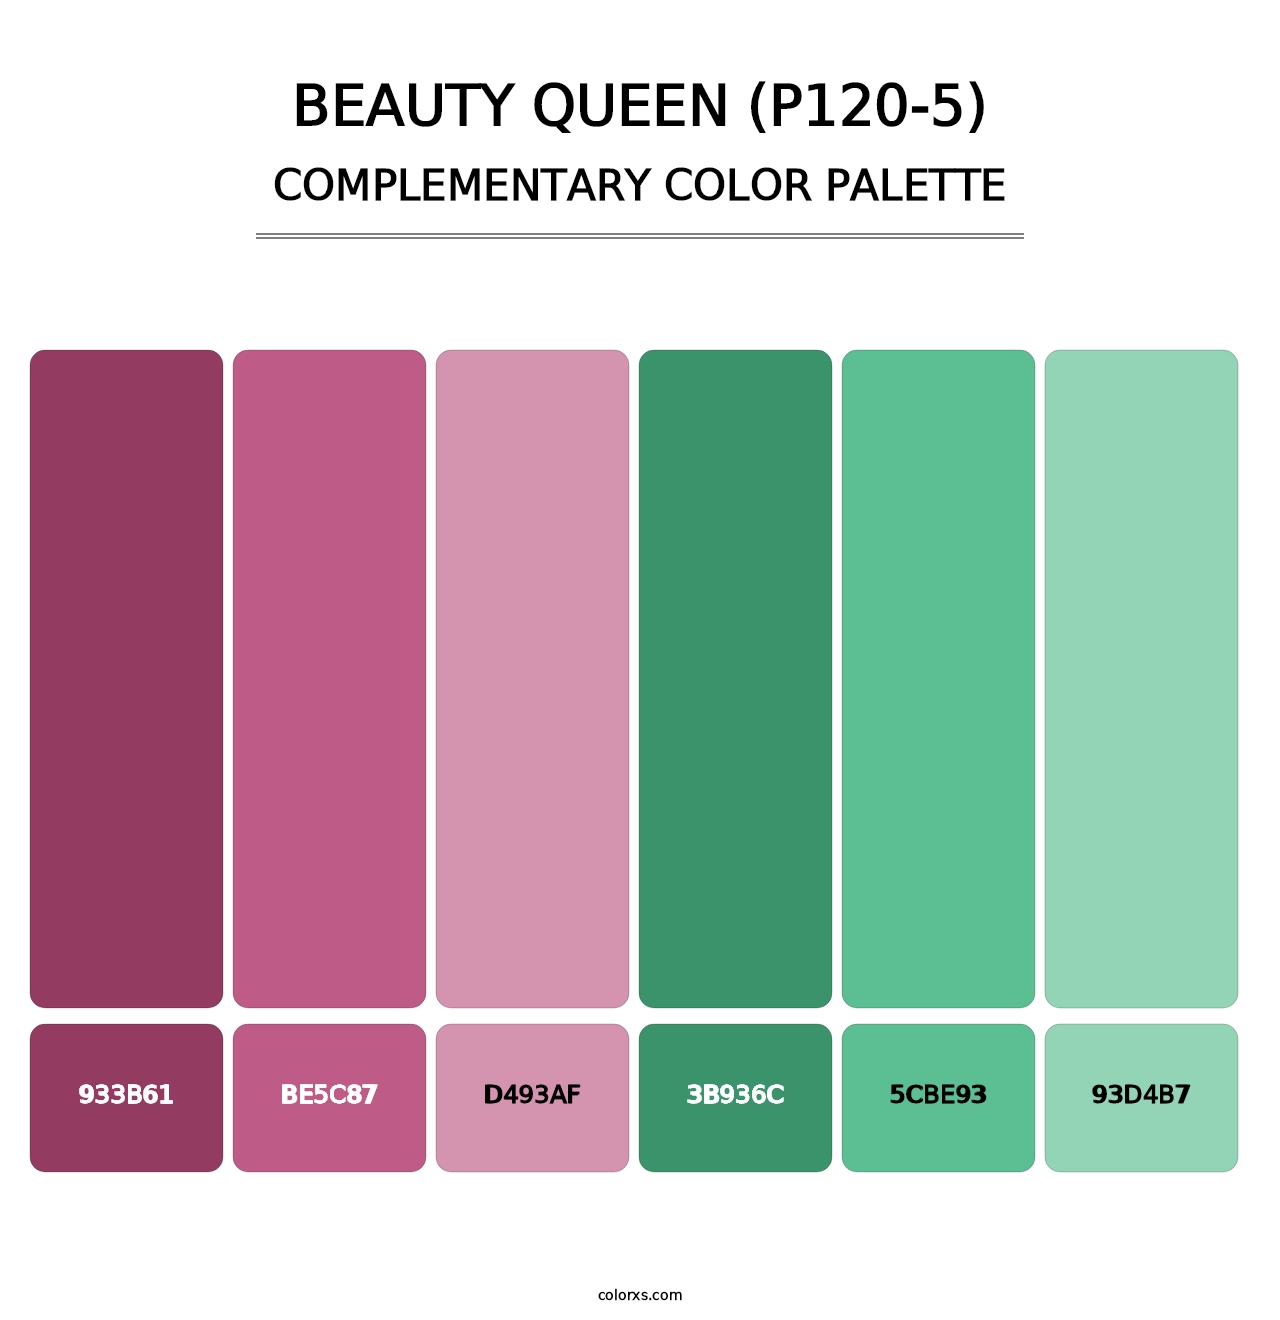 Beauty Queen (P120-5) - Complementary Color Palette